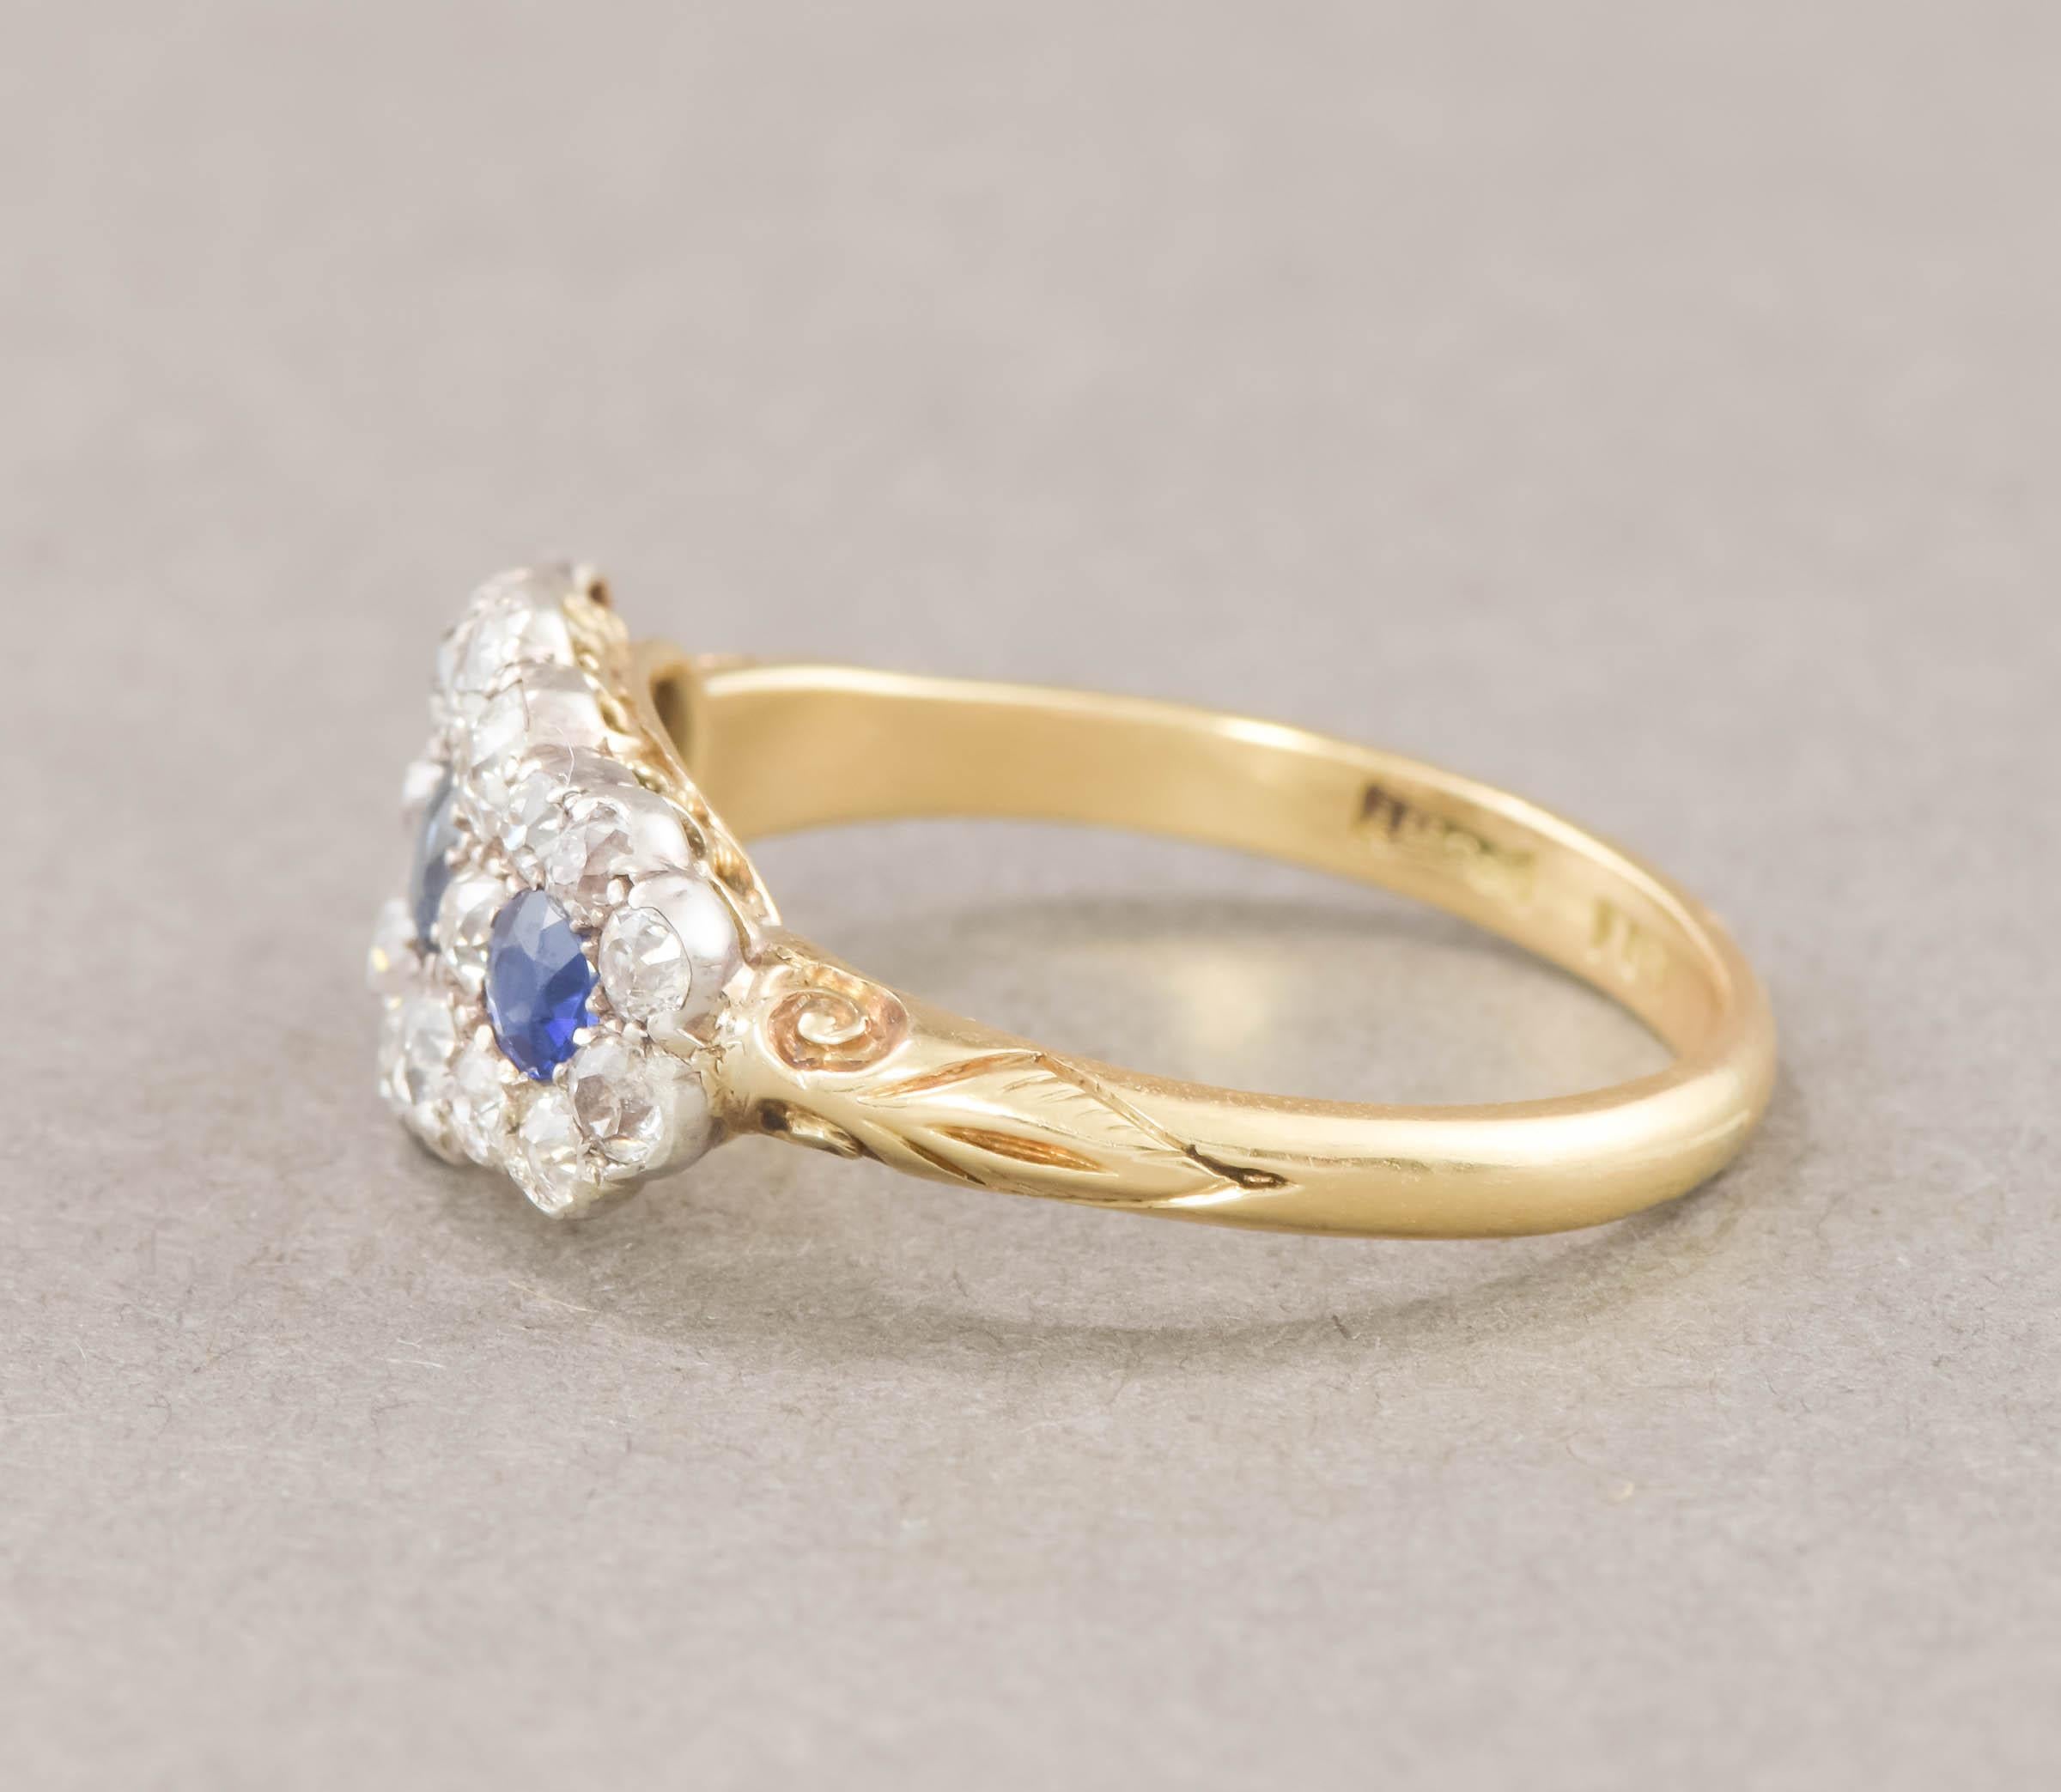 Antique Sapphire Diamond Triple Flower Ring with Old European Cut Diamonds In Good Condition For Sale In Danvers, MA